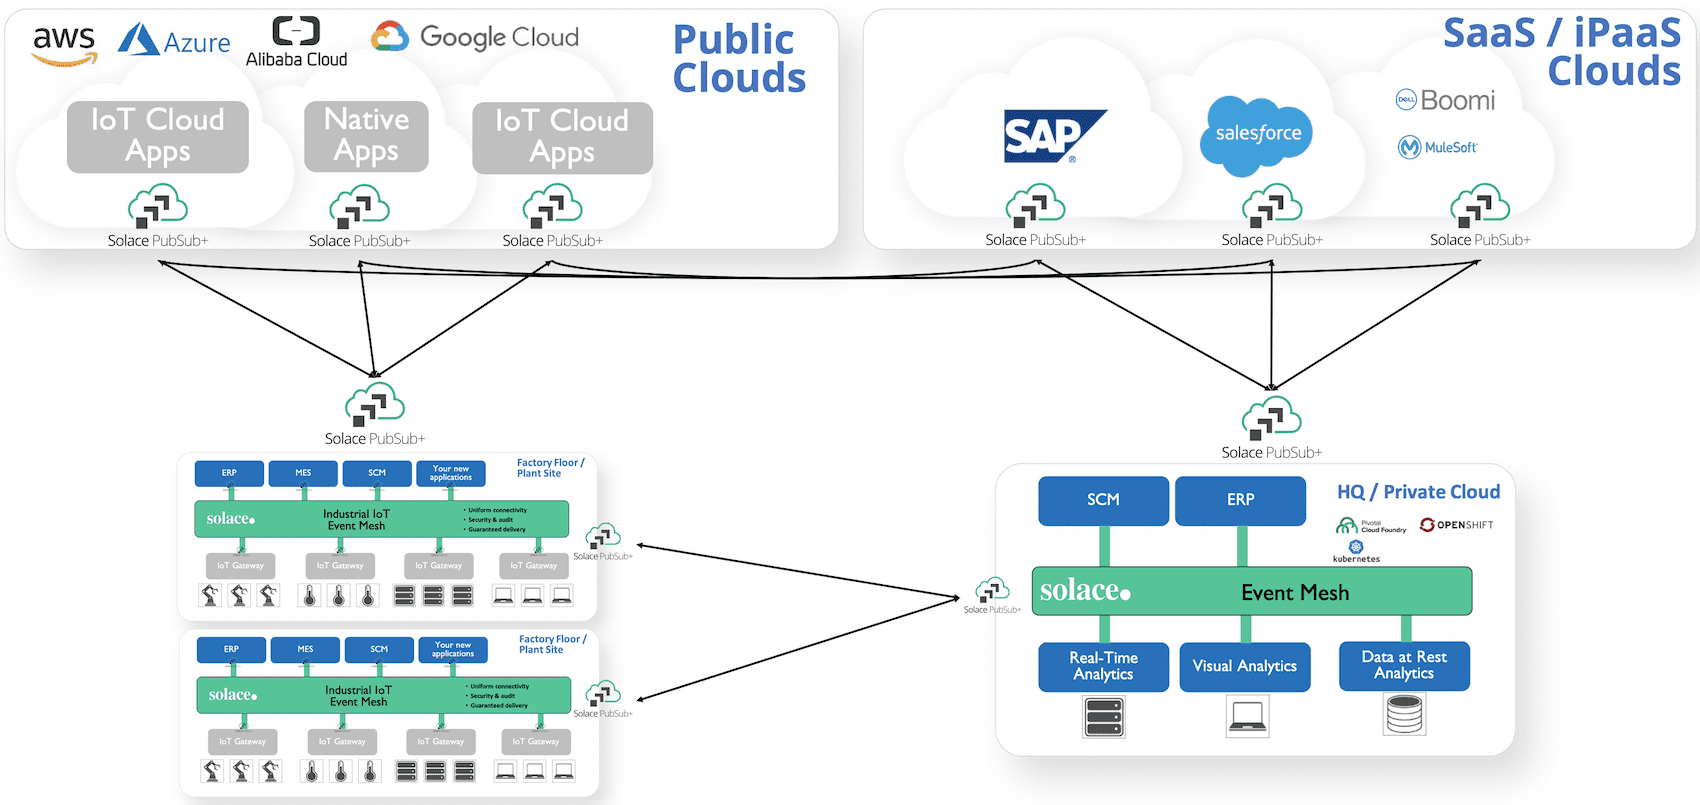 An event mesh diagram spanning public and private clouds for digital manufacturing